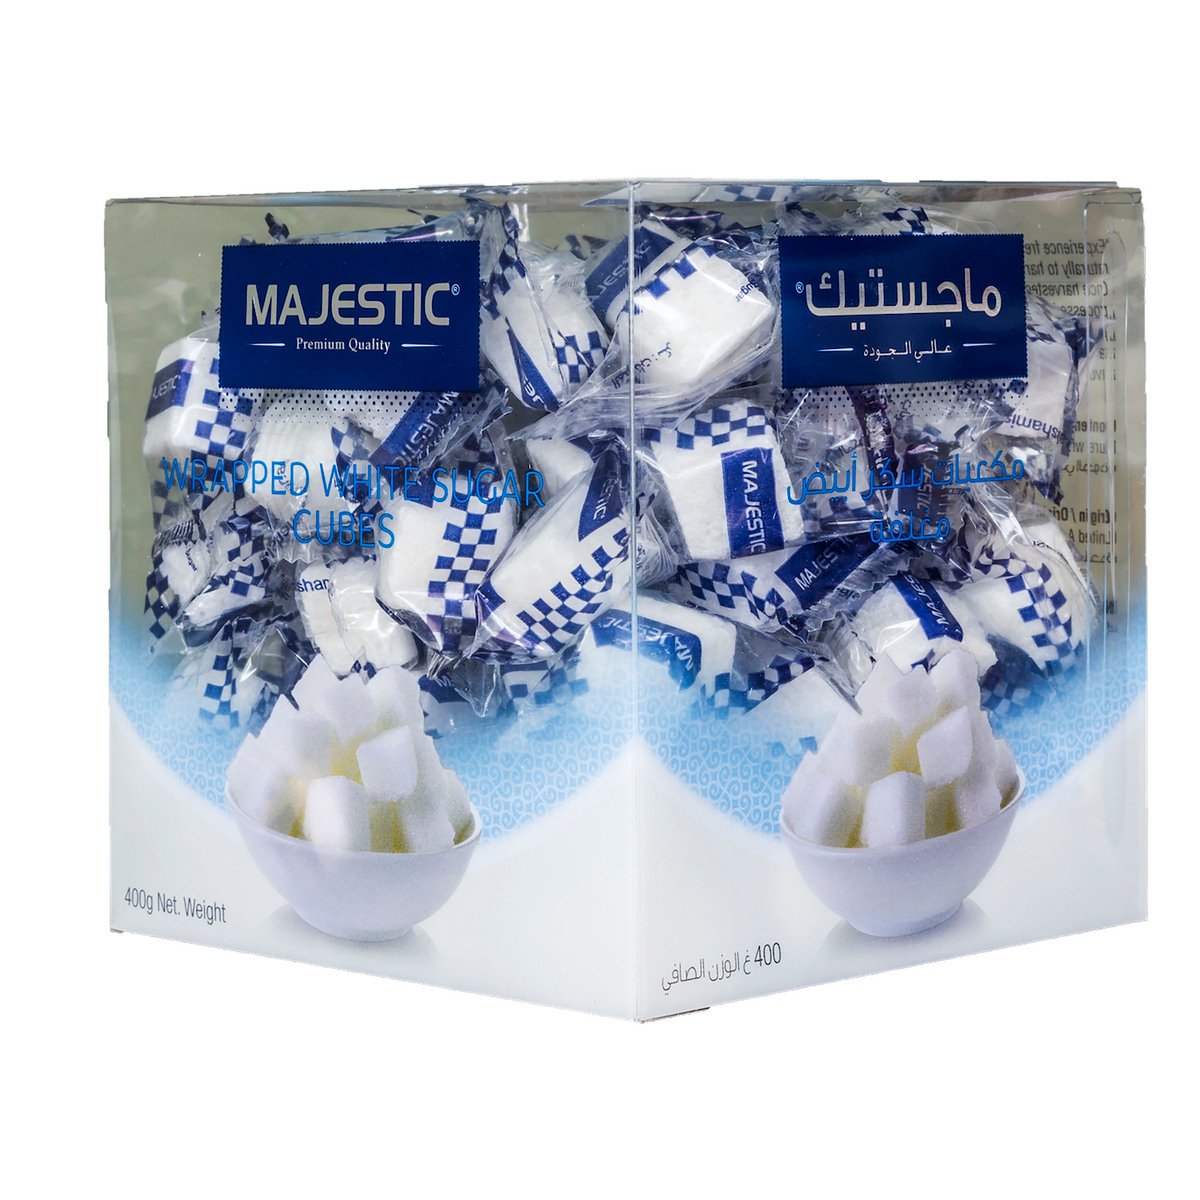 Majestic Wrapped White Sugar Cubes 400 g